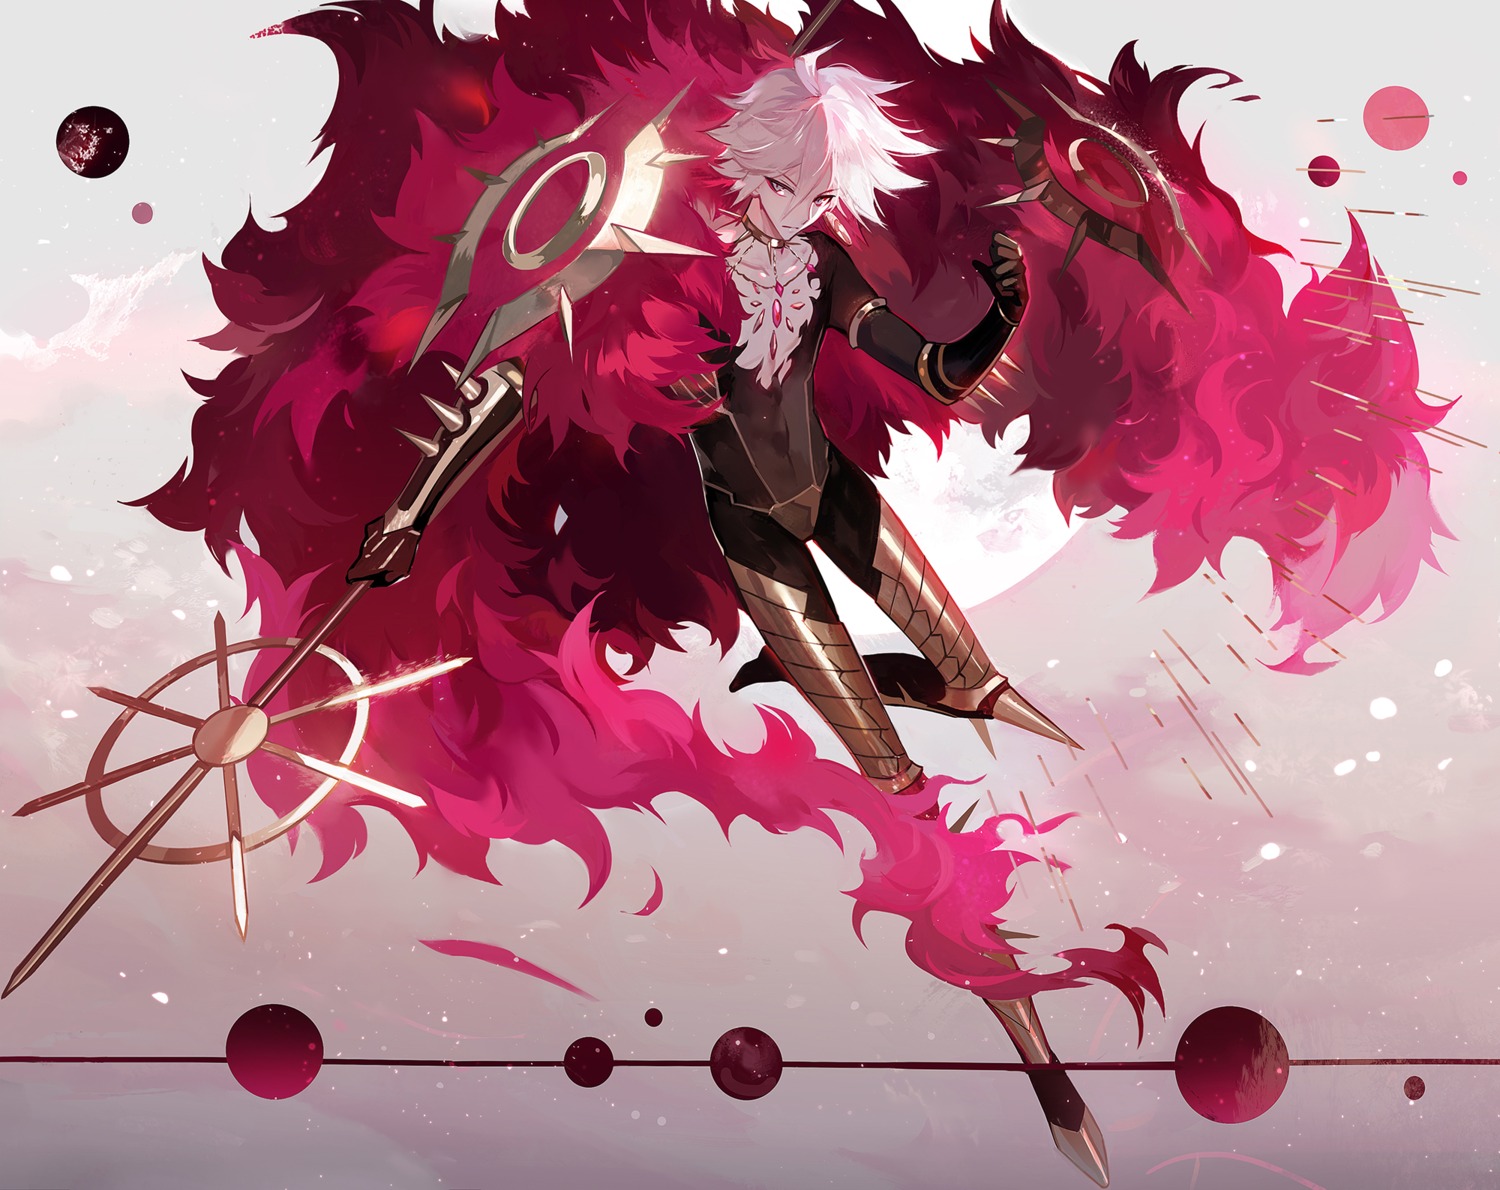 Juexing Moemoe3345 Fate Apocrypha Fate Grand Order Fate Stay Night Karna Fate Armor Male Weapon 4244 Yande Re